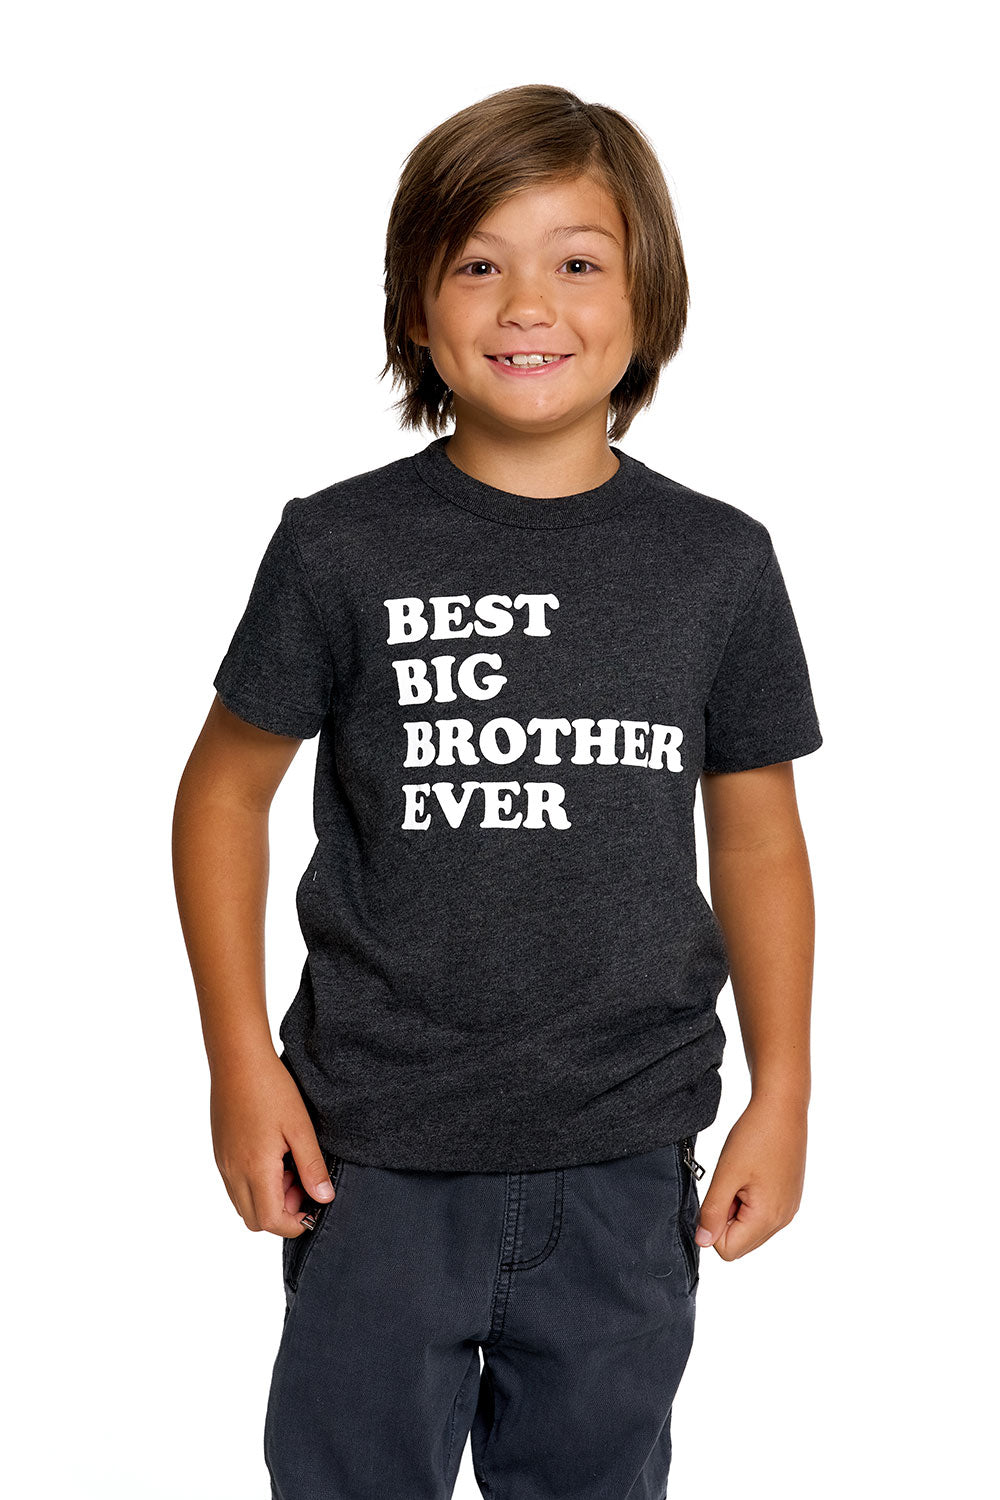 Best Big Brother BOYS chaserbrand